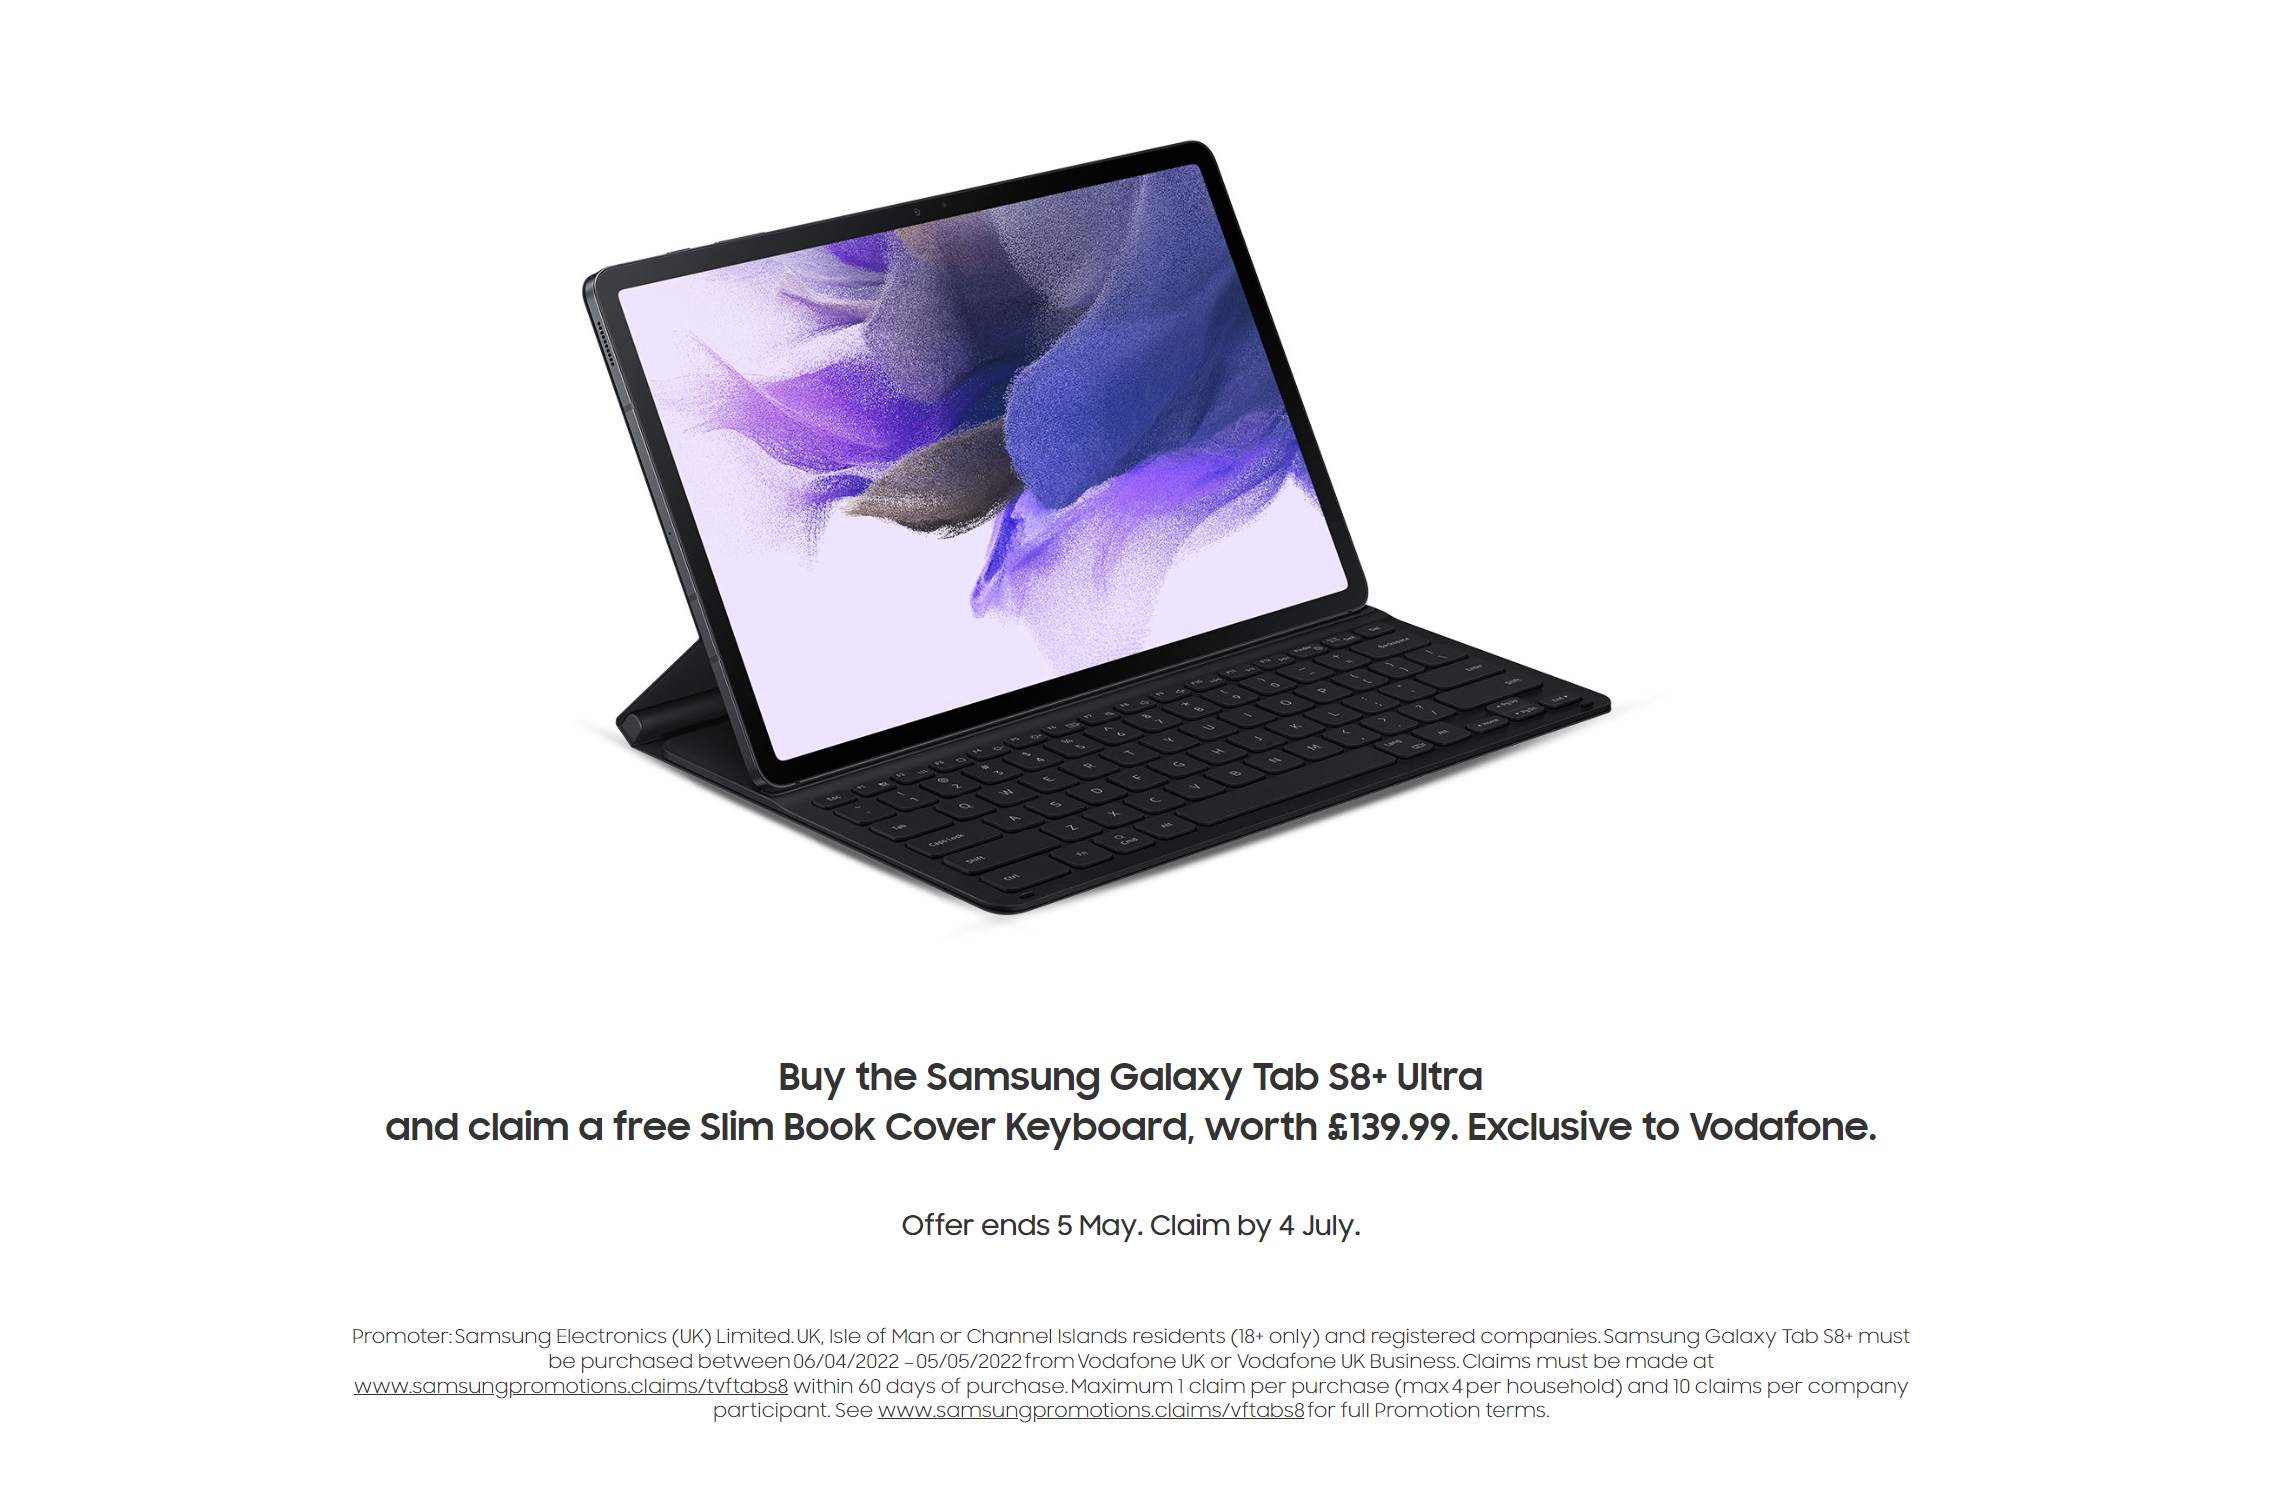 Free Slim Book Cover Keyboard with Samsung Galaxy Tab S8 Plus (S8+) deals